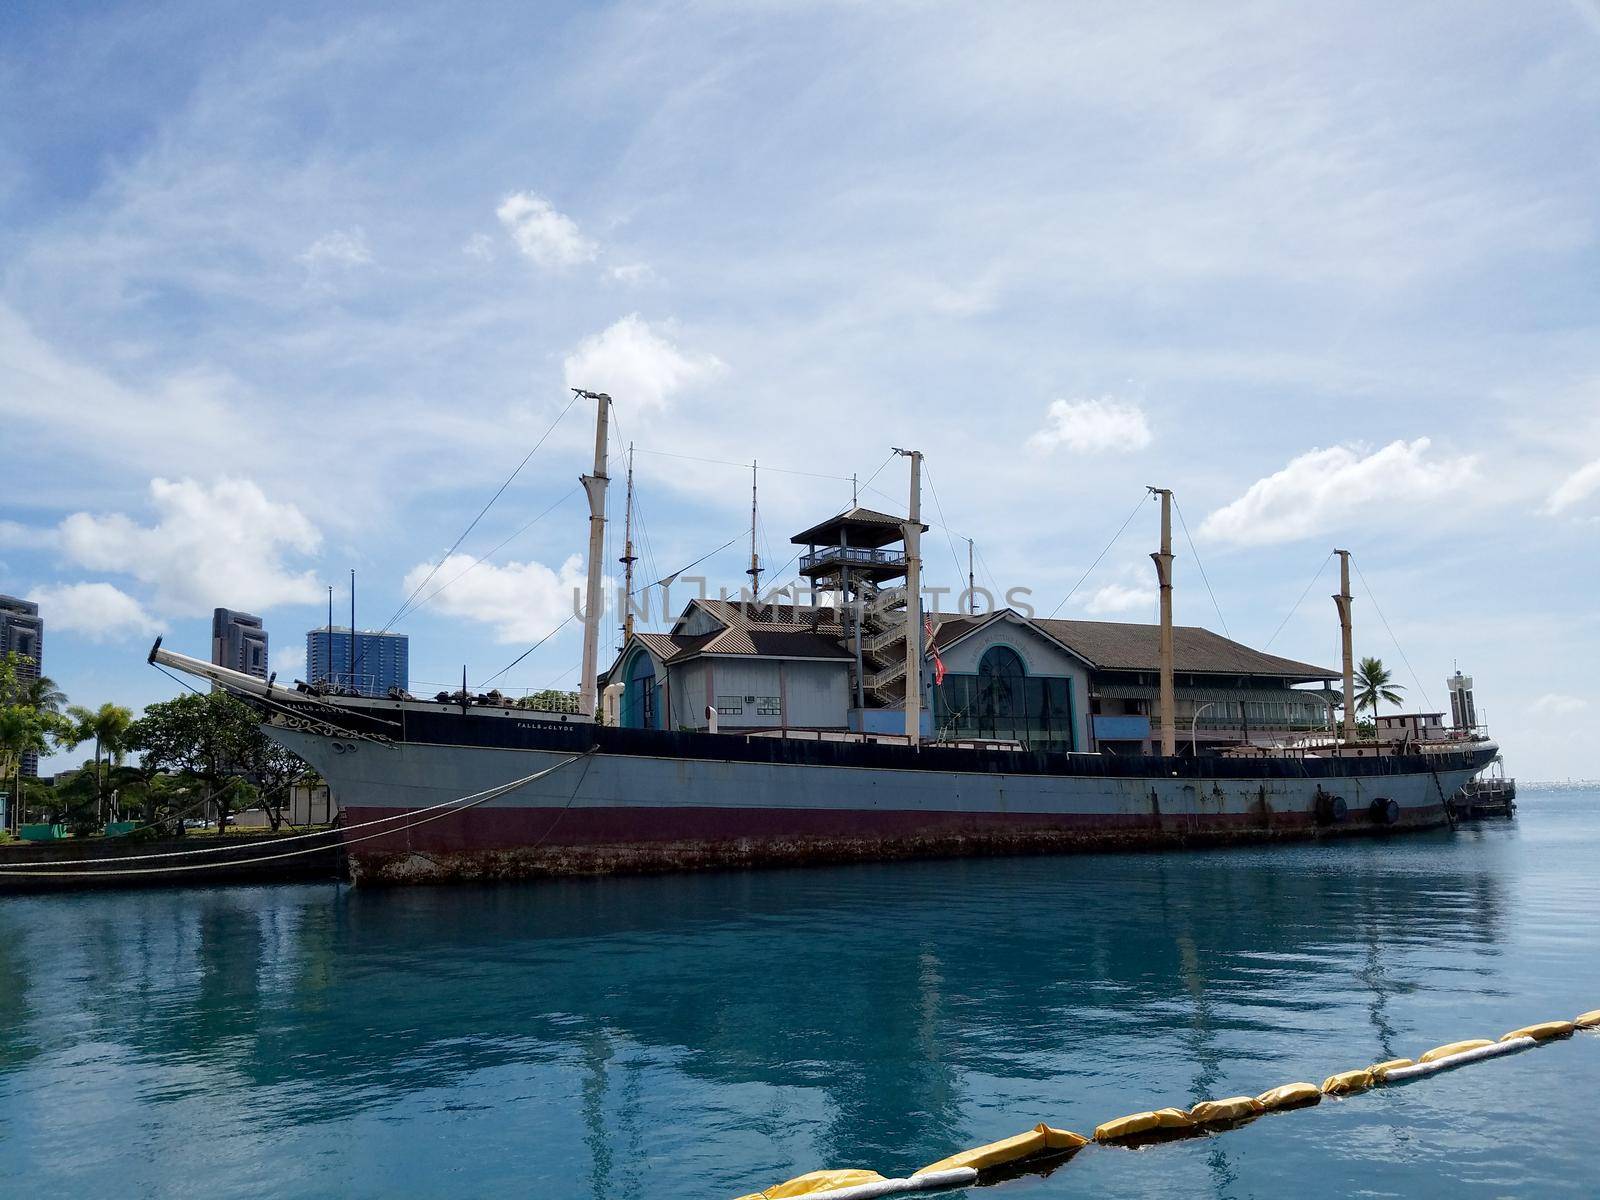 Historic Falls of Clyde Ship sits in Honolulu Harbor during the day. Falls of Clyde is the last surviving iron-hulled, four-masted full rigged ship, and the only remaining sail-driven oil tanker built in the 19th century. Designated a U.S. National Historic Landmark in 1989